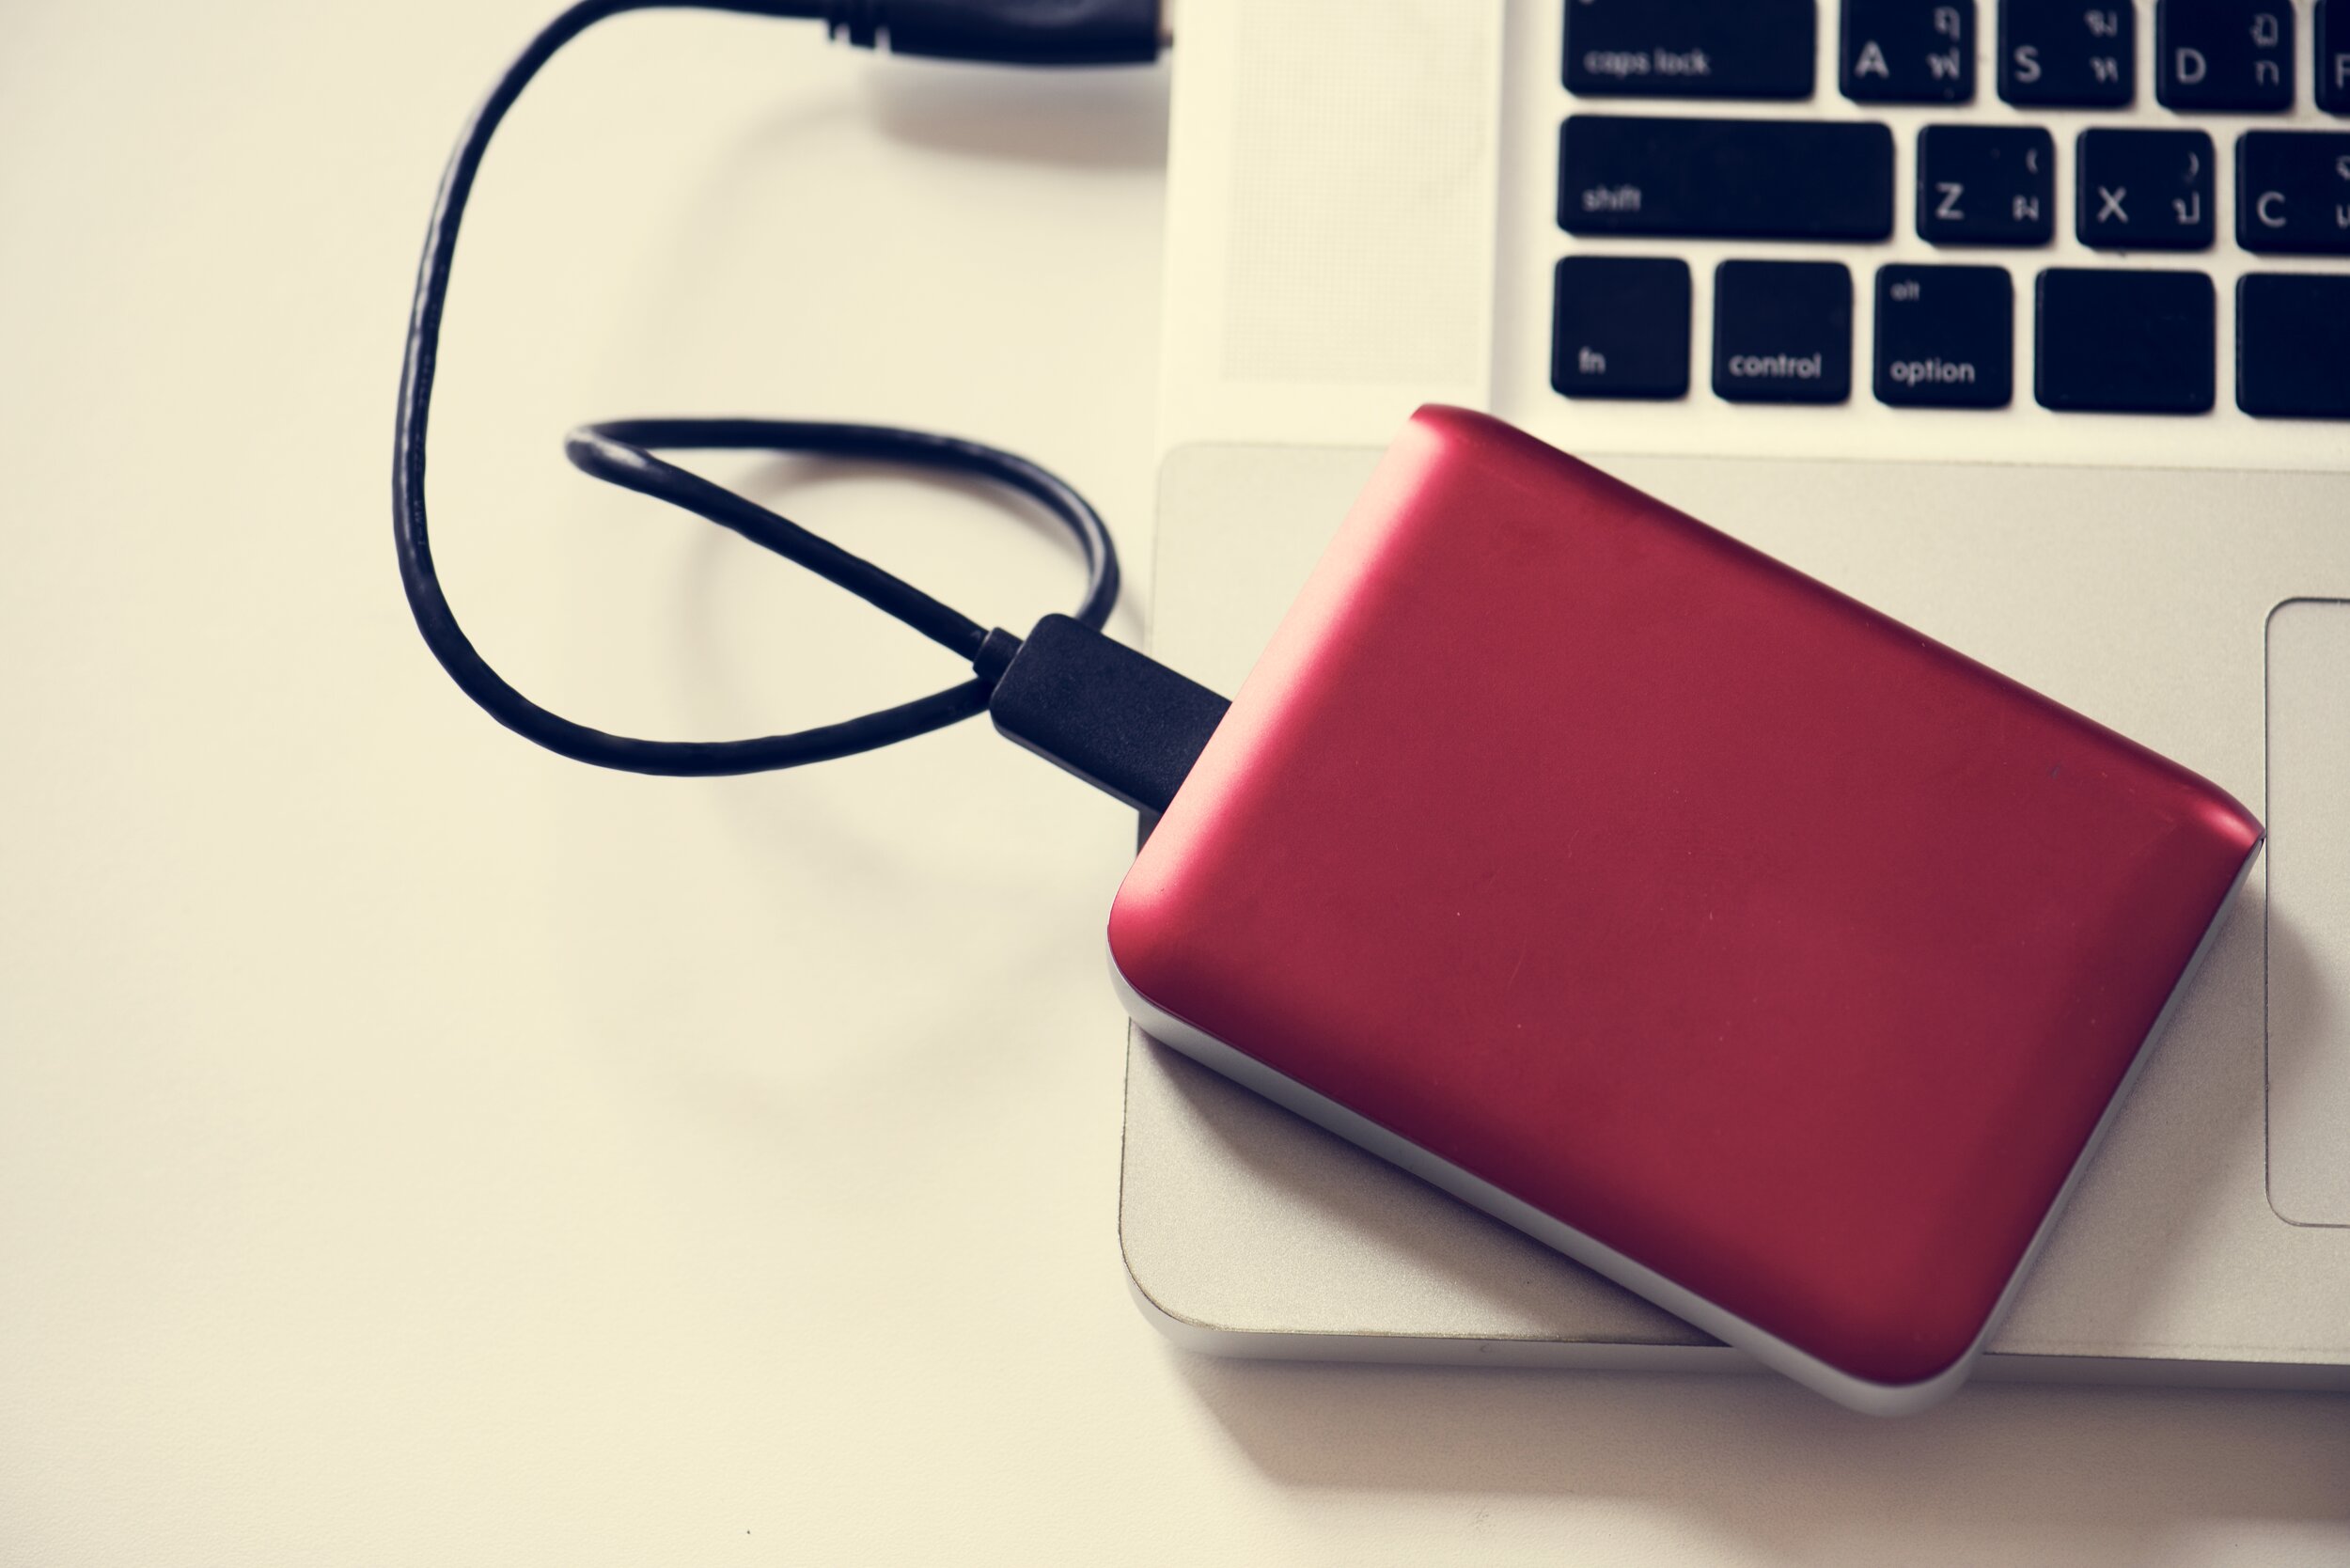 External hard drive connected to iMac or MacBook Pro or MacBook Air laptop